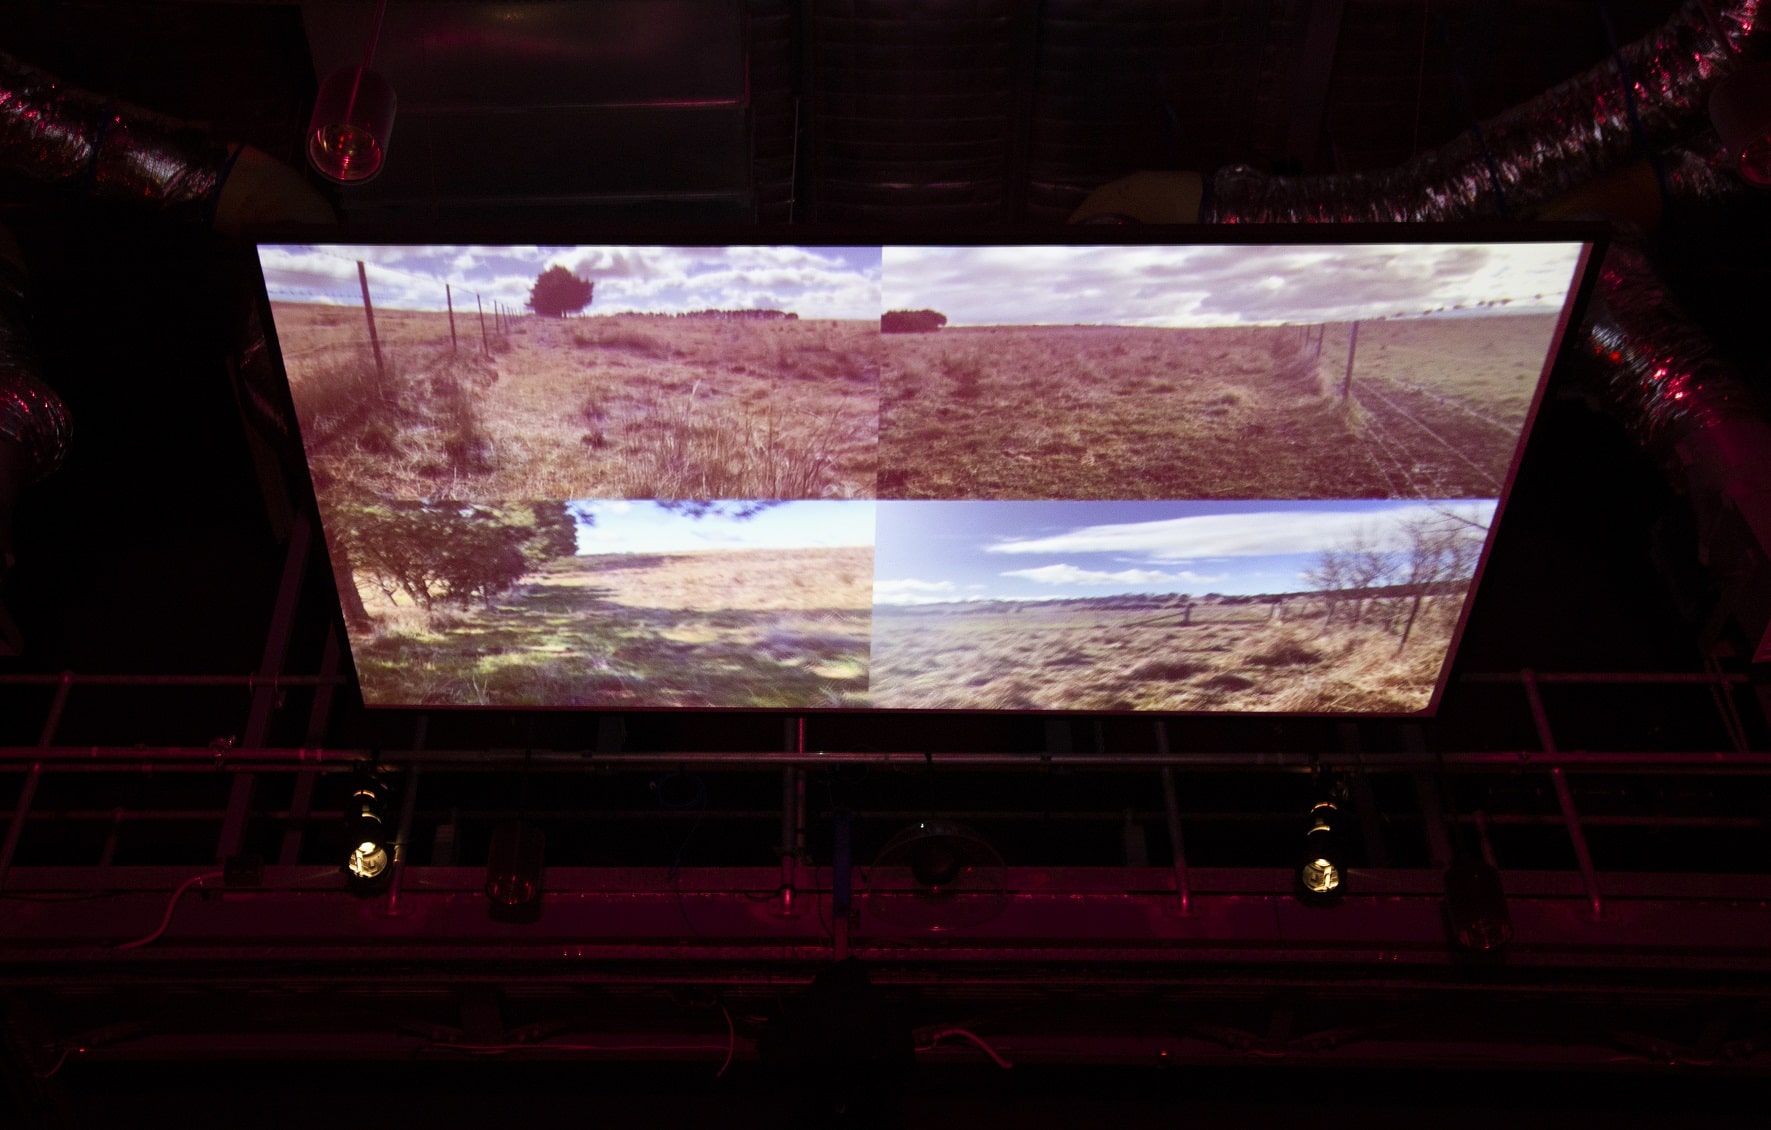 A large projection screen is suspended in the industrial ceiling surrounded by pipes and technical equipment. Projected on the screen is four seperate images in each quater of the screen, each displaying imagery of a rural country setting with brown unmaintained grass and weeds, blue sky boparded by barbed wire fences.